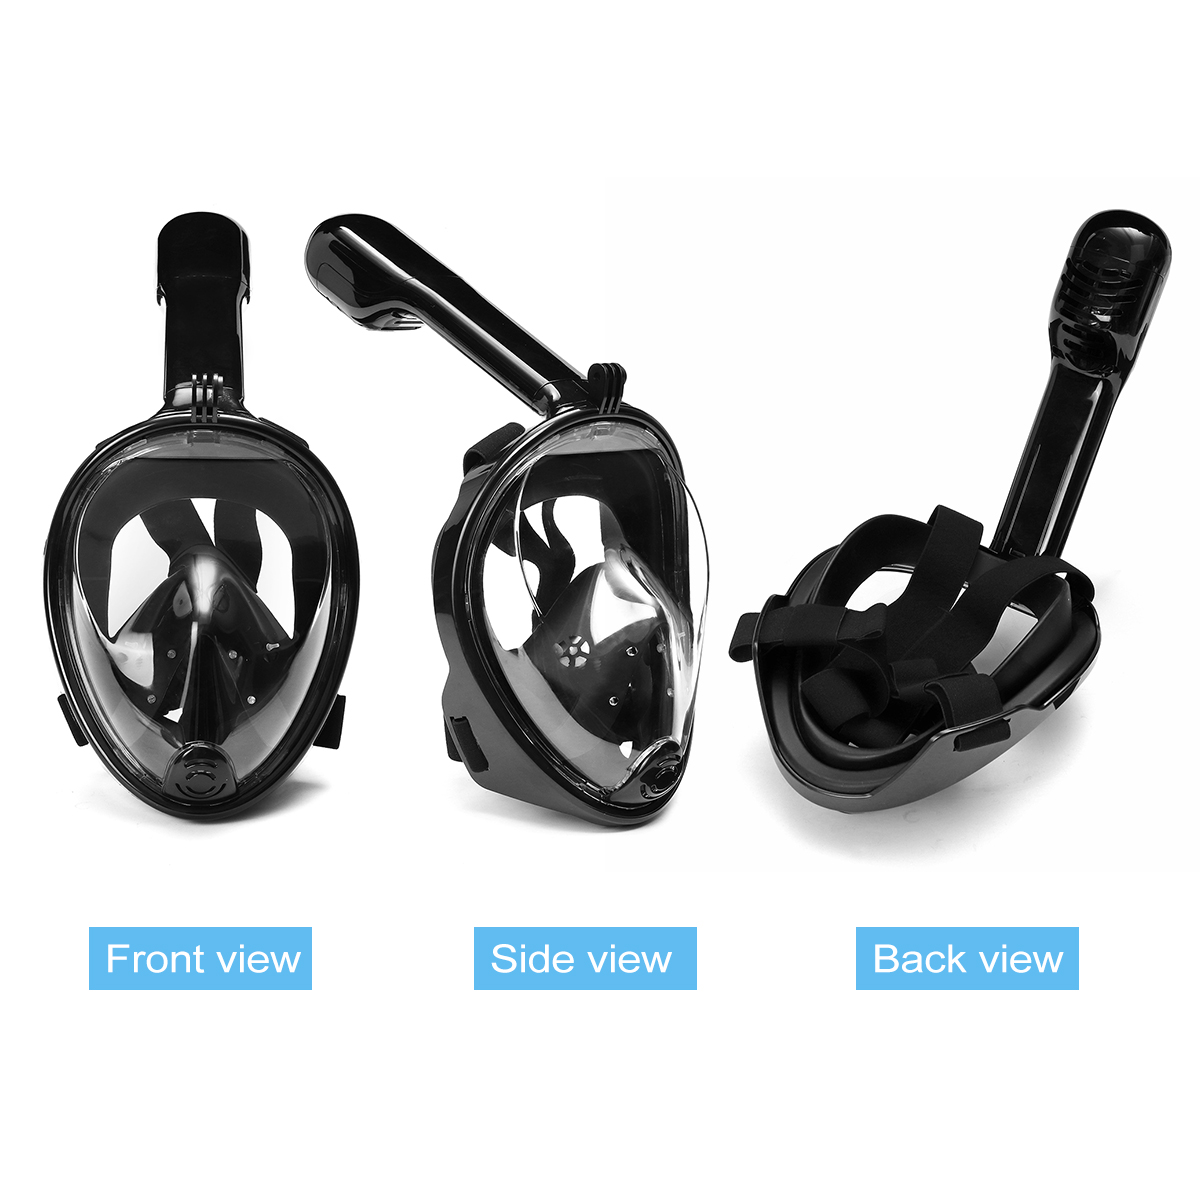 180° Viewing Area Full Dry Snorkeling Mask 185x150x188mm Fog Resistant Adjustment Diving Mask with a Camera Base